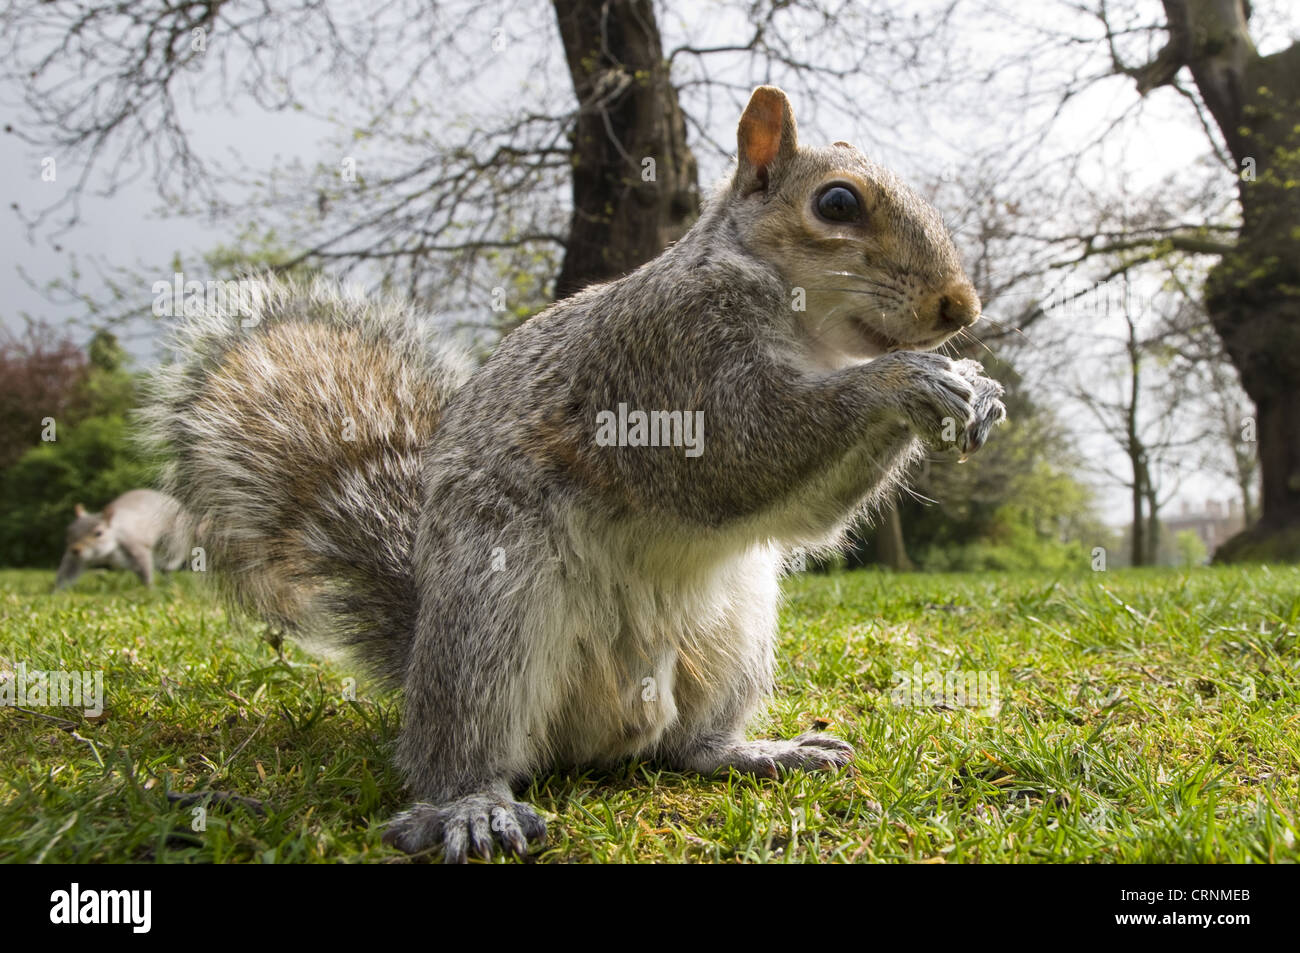 Eastern Grey Squirrel (Sciurus carolinensis) introduced species, adult, feeding, sitting on ground in city parkland, with Stock Photo